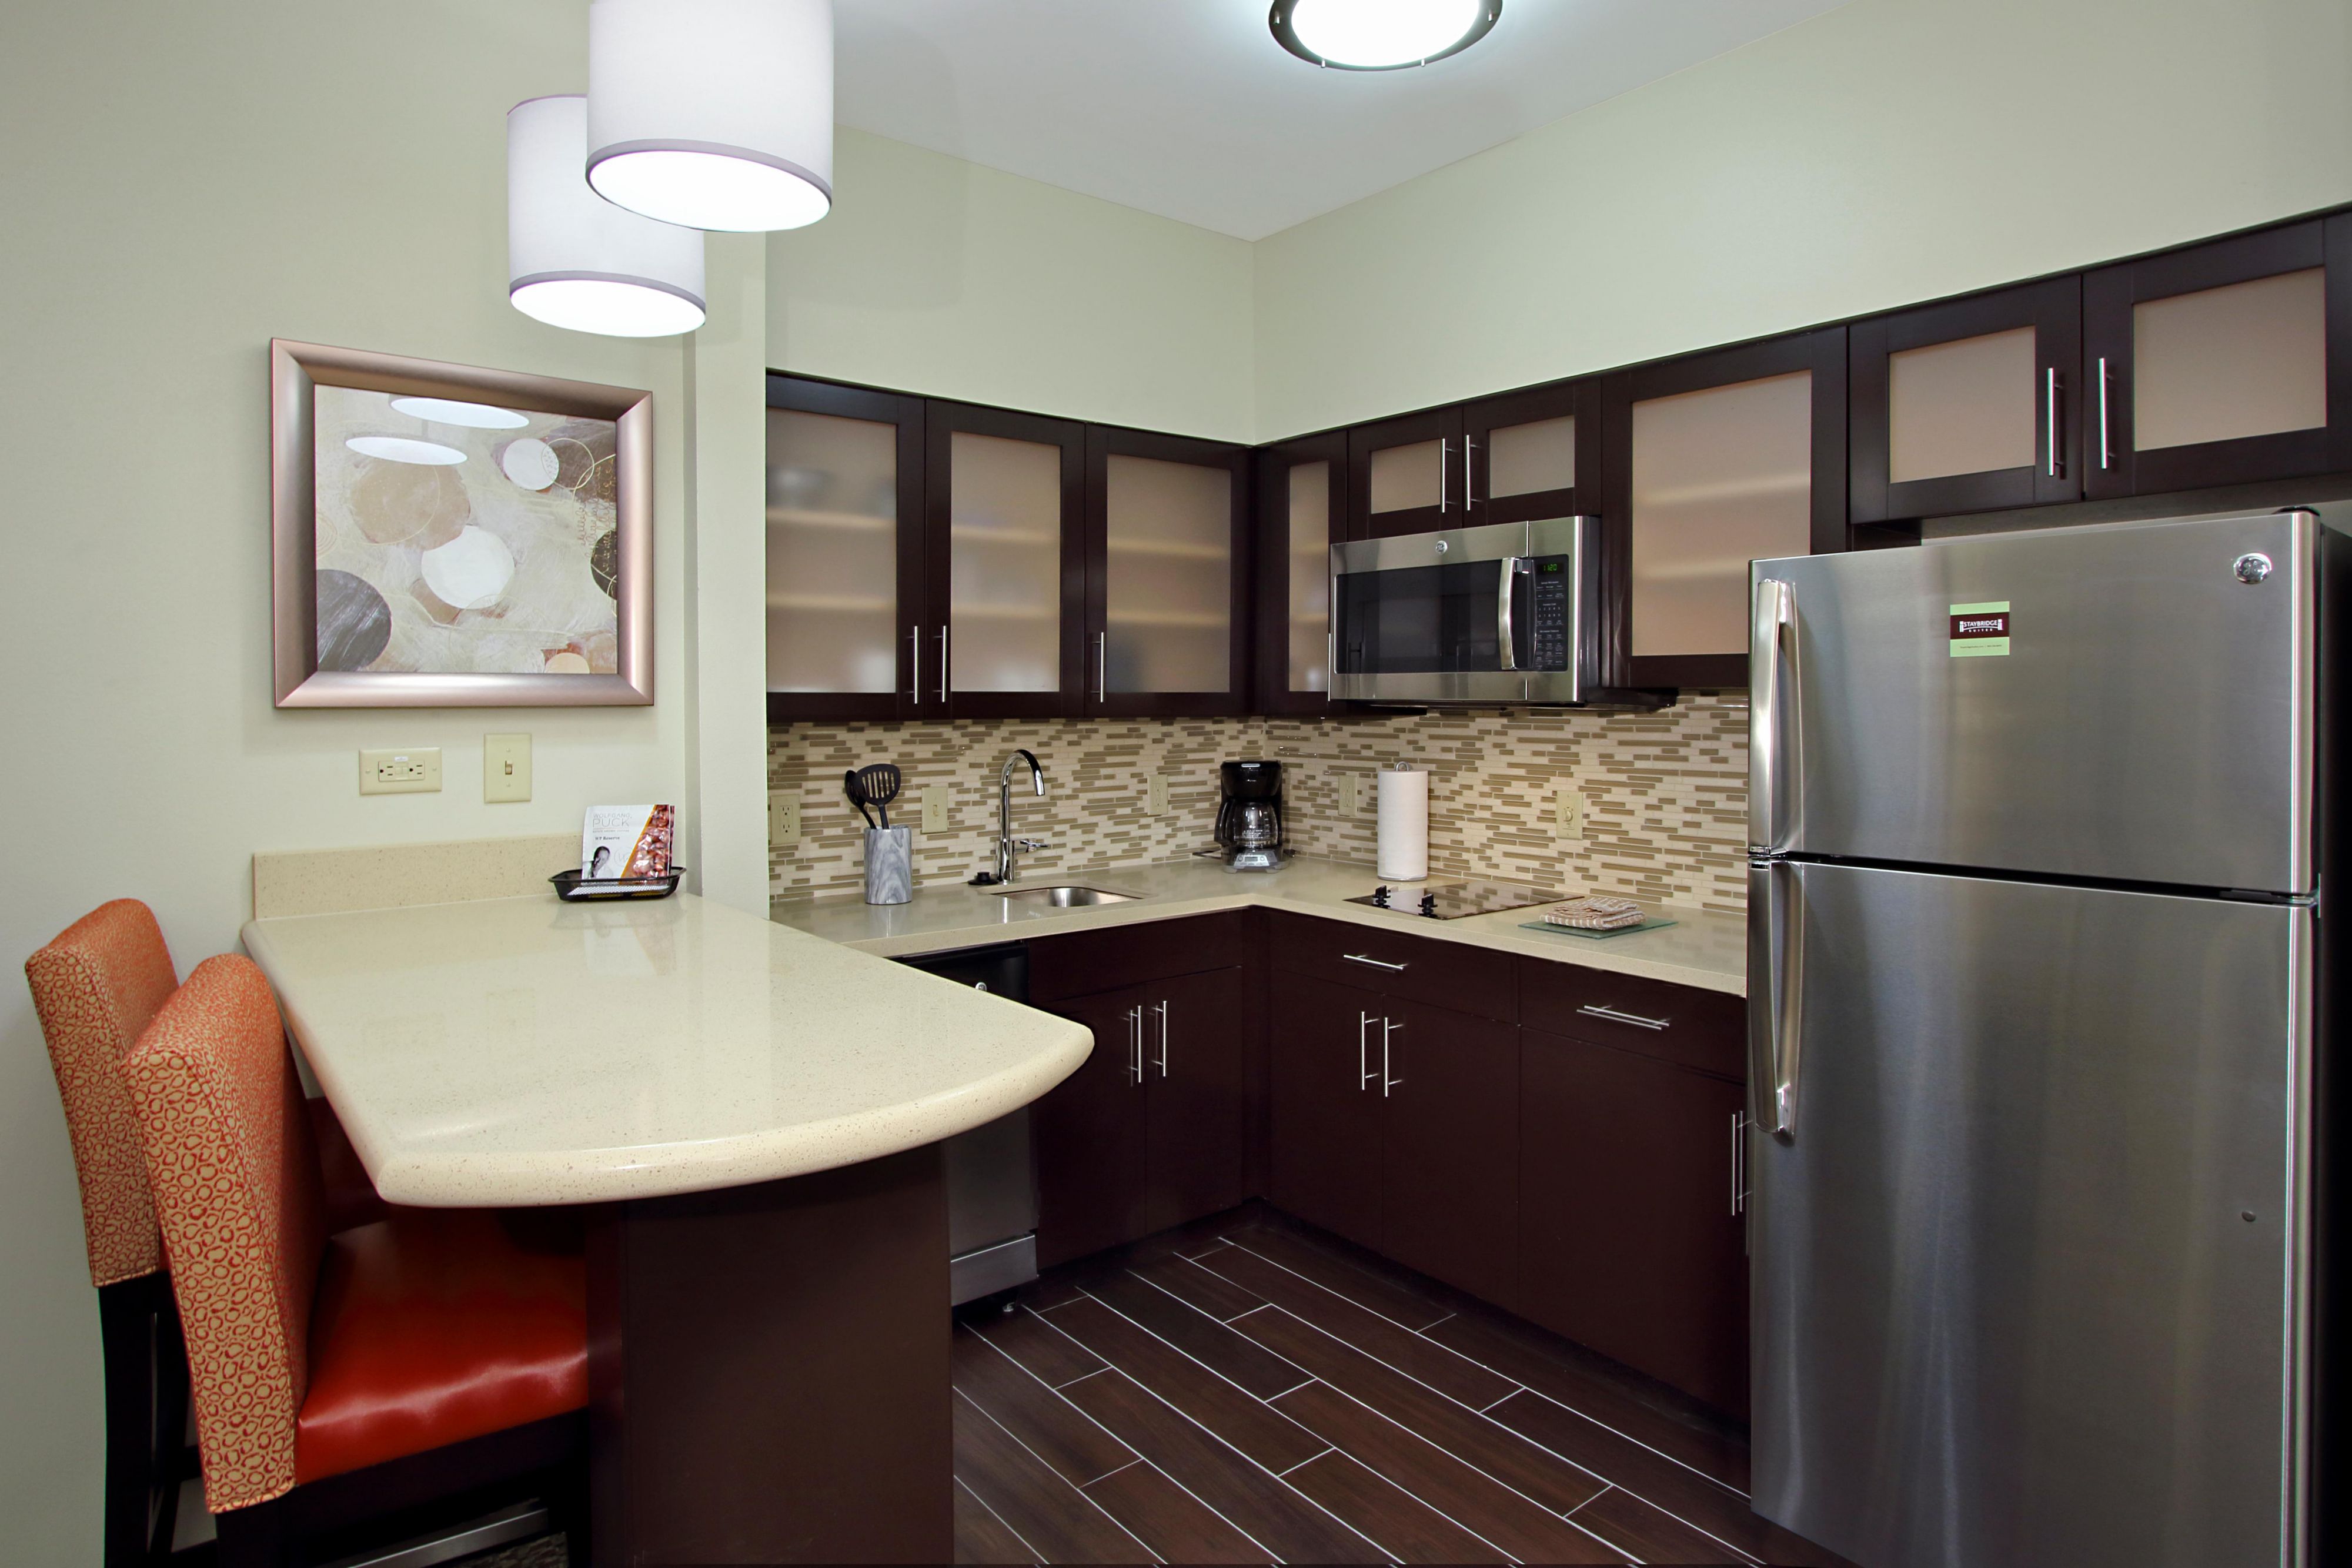  At your convenience we include fully equipped kitchens in all of our rooms! We include pots, pans, silverware, chinaware, dishwasher and much more!